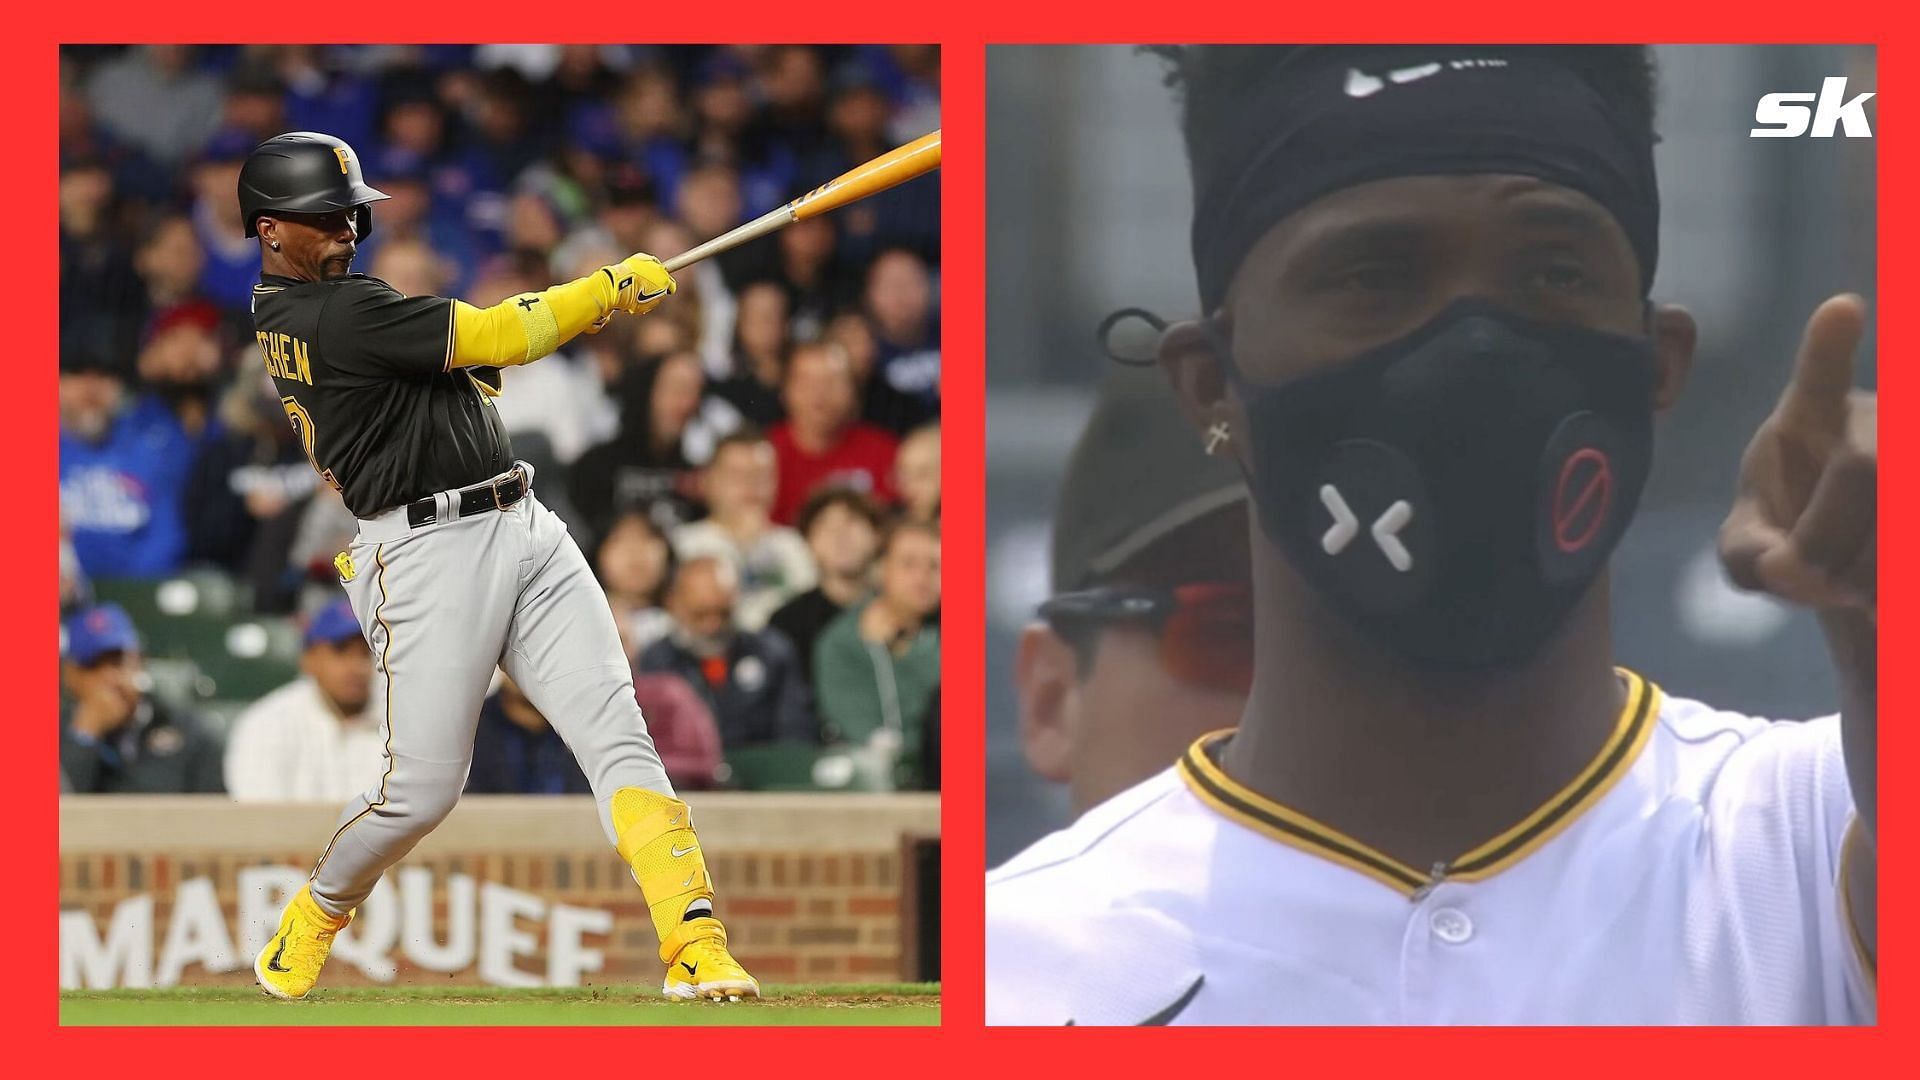 Why did Andrew McCutchen wear a mask?